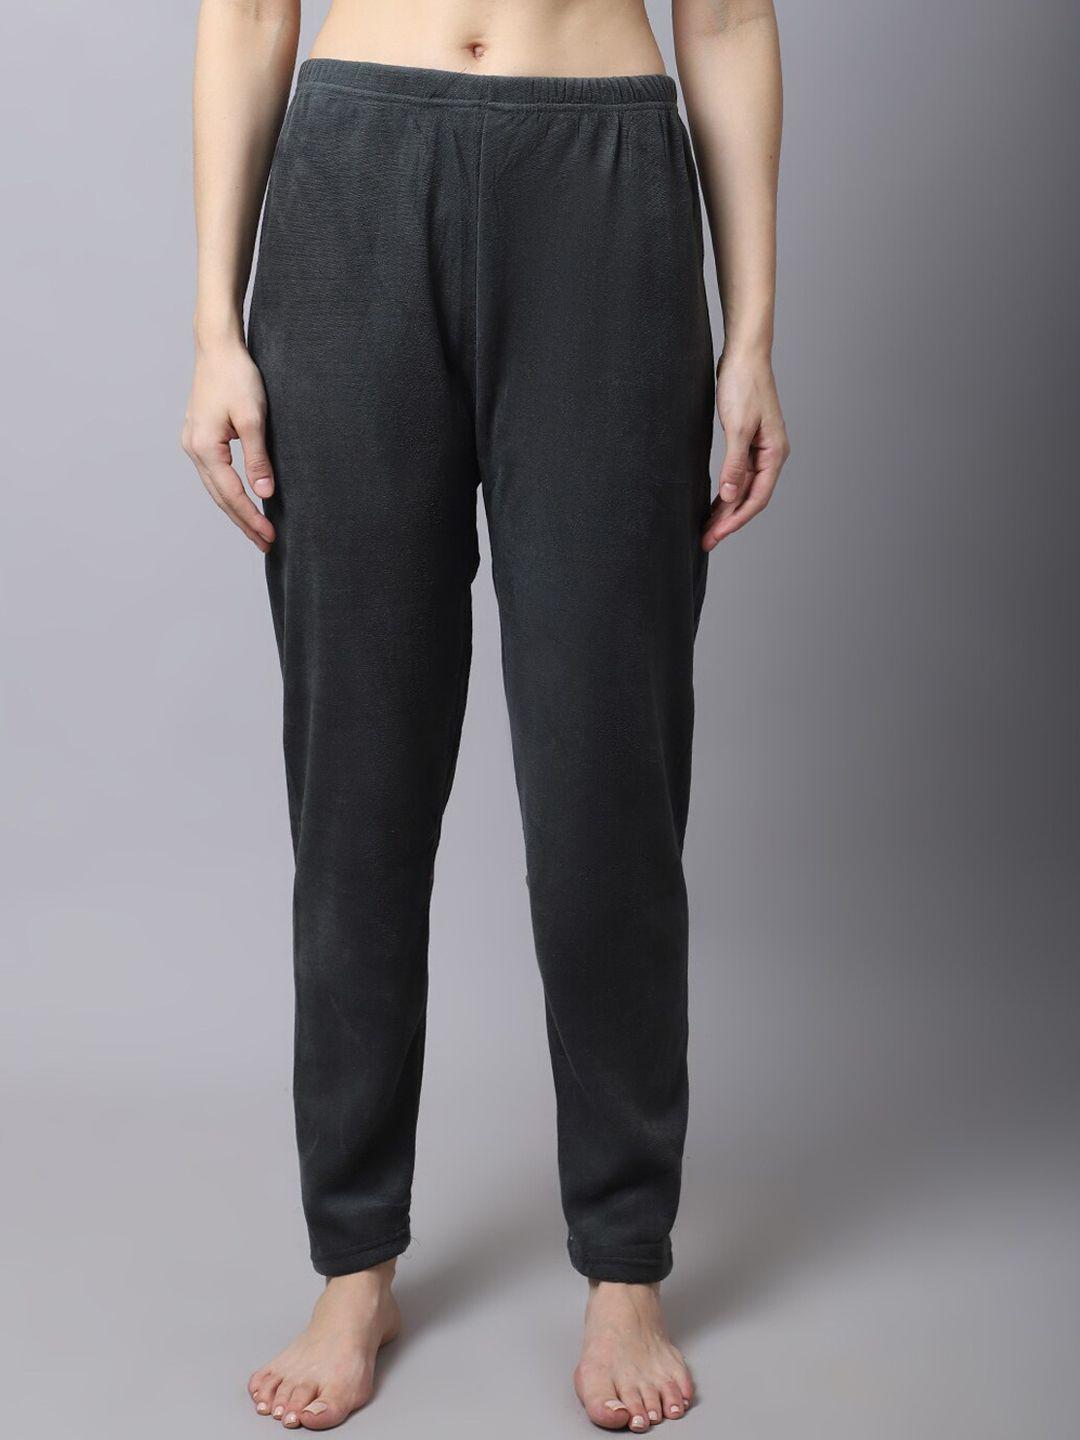 tag 7 women grey solid lounge pant